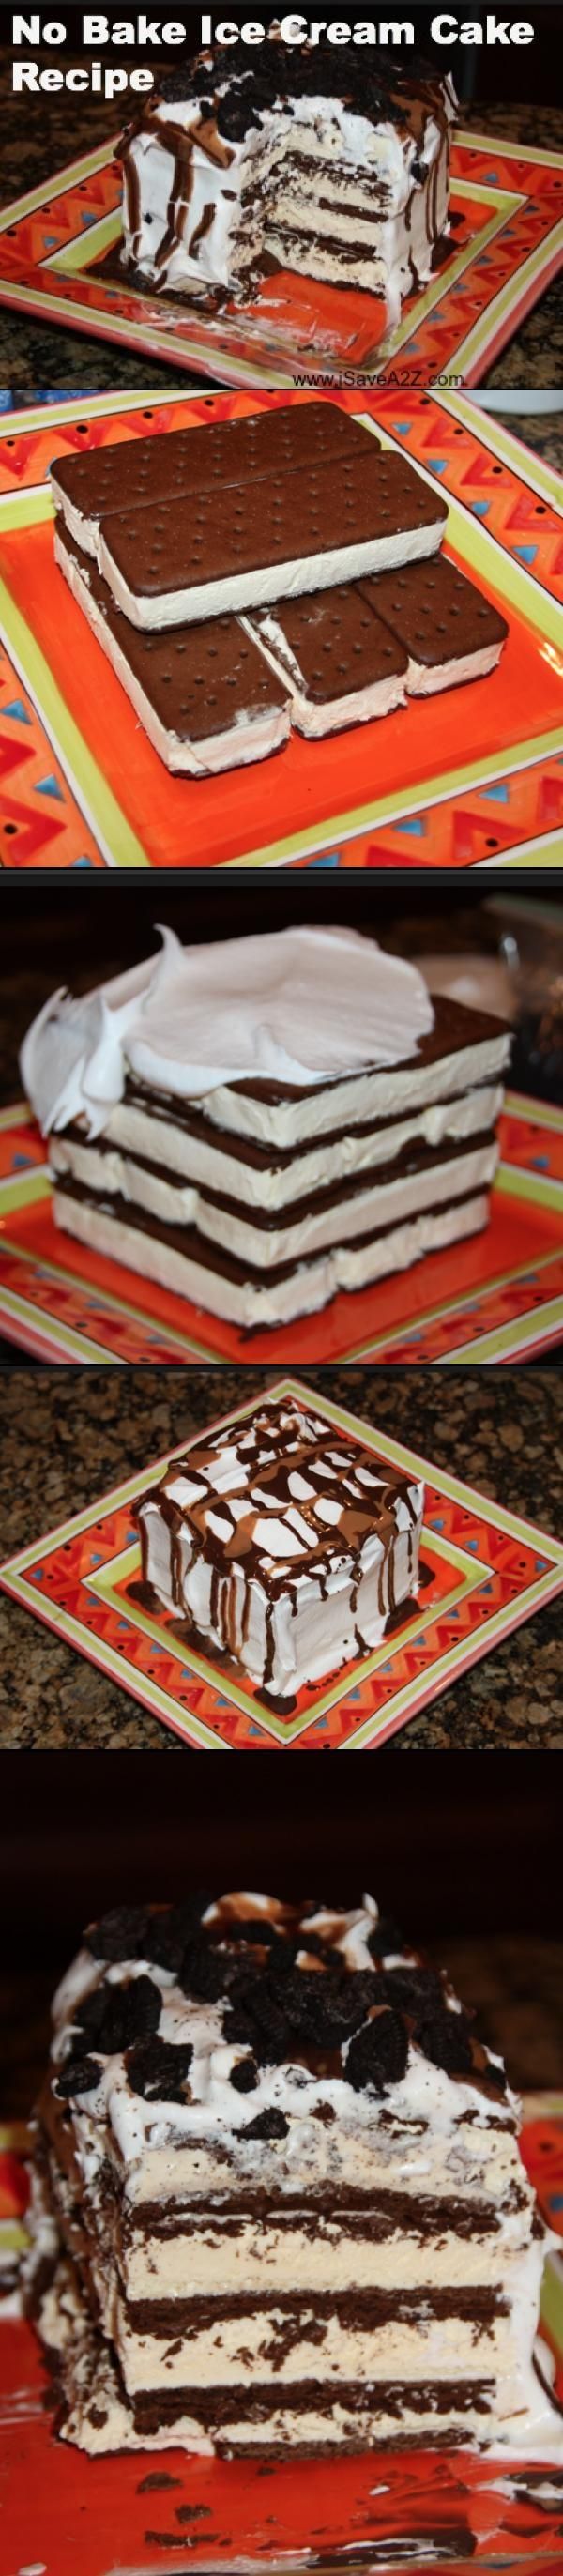 NO BAKING REQD!! Ice Cream Sandwich cake that is to die for!!!